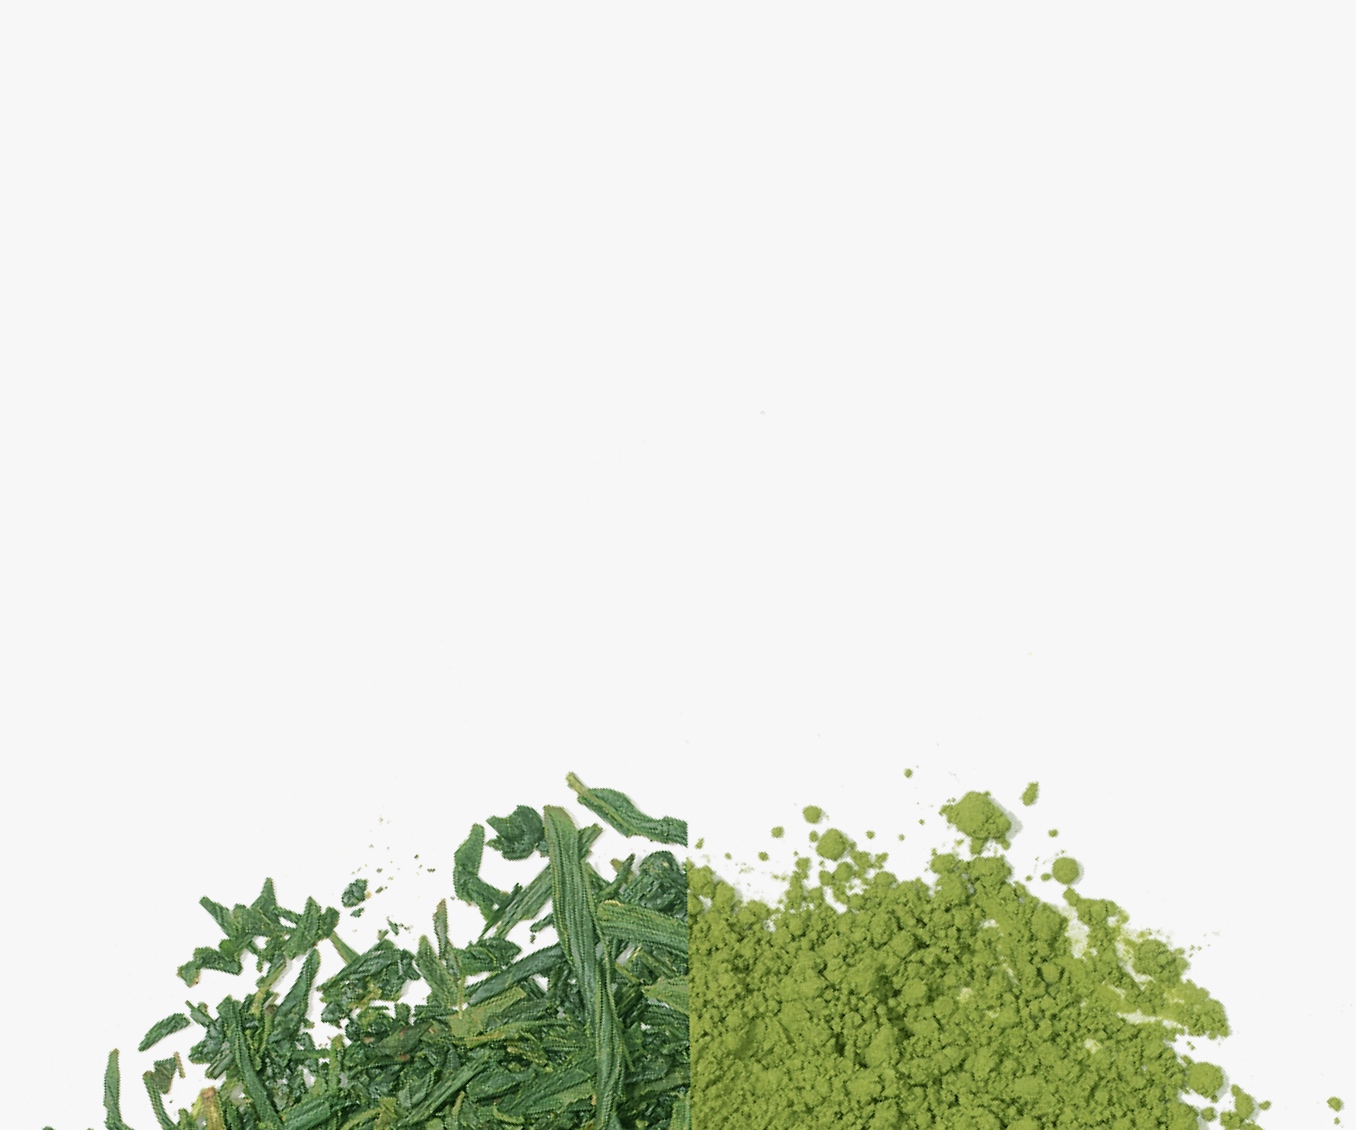 Matcha powder and matcha leaves next to each other.